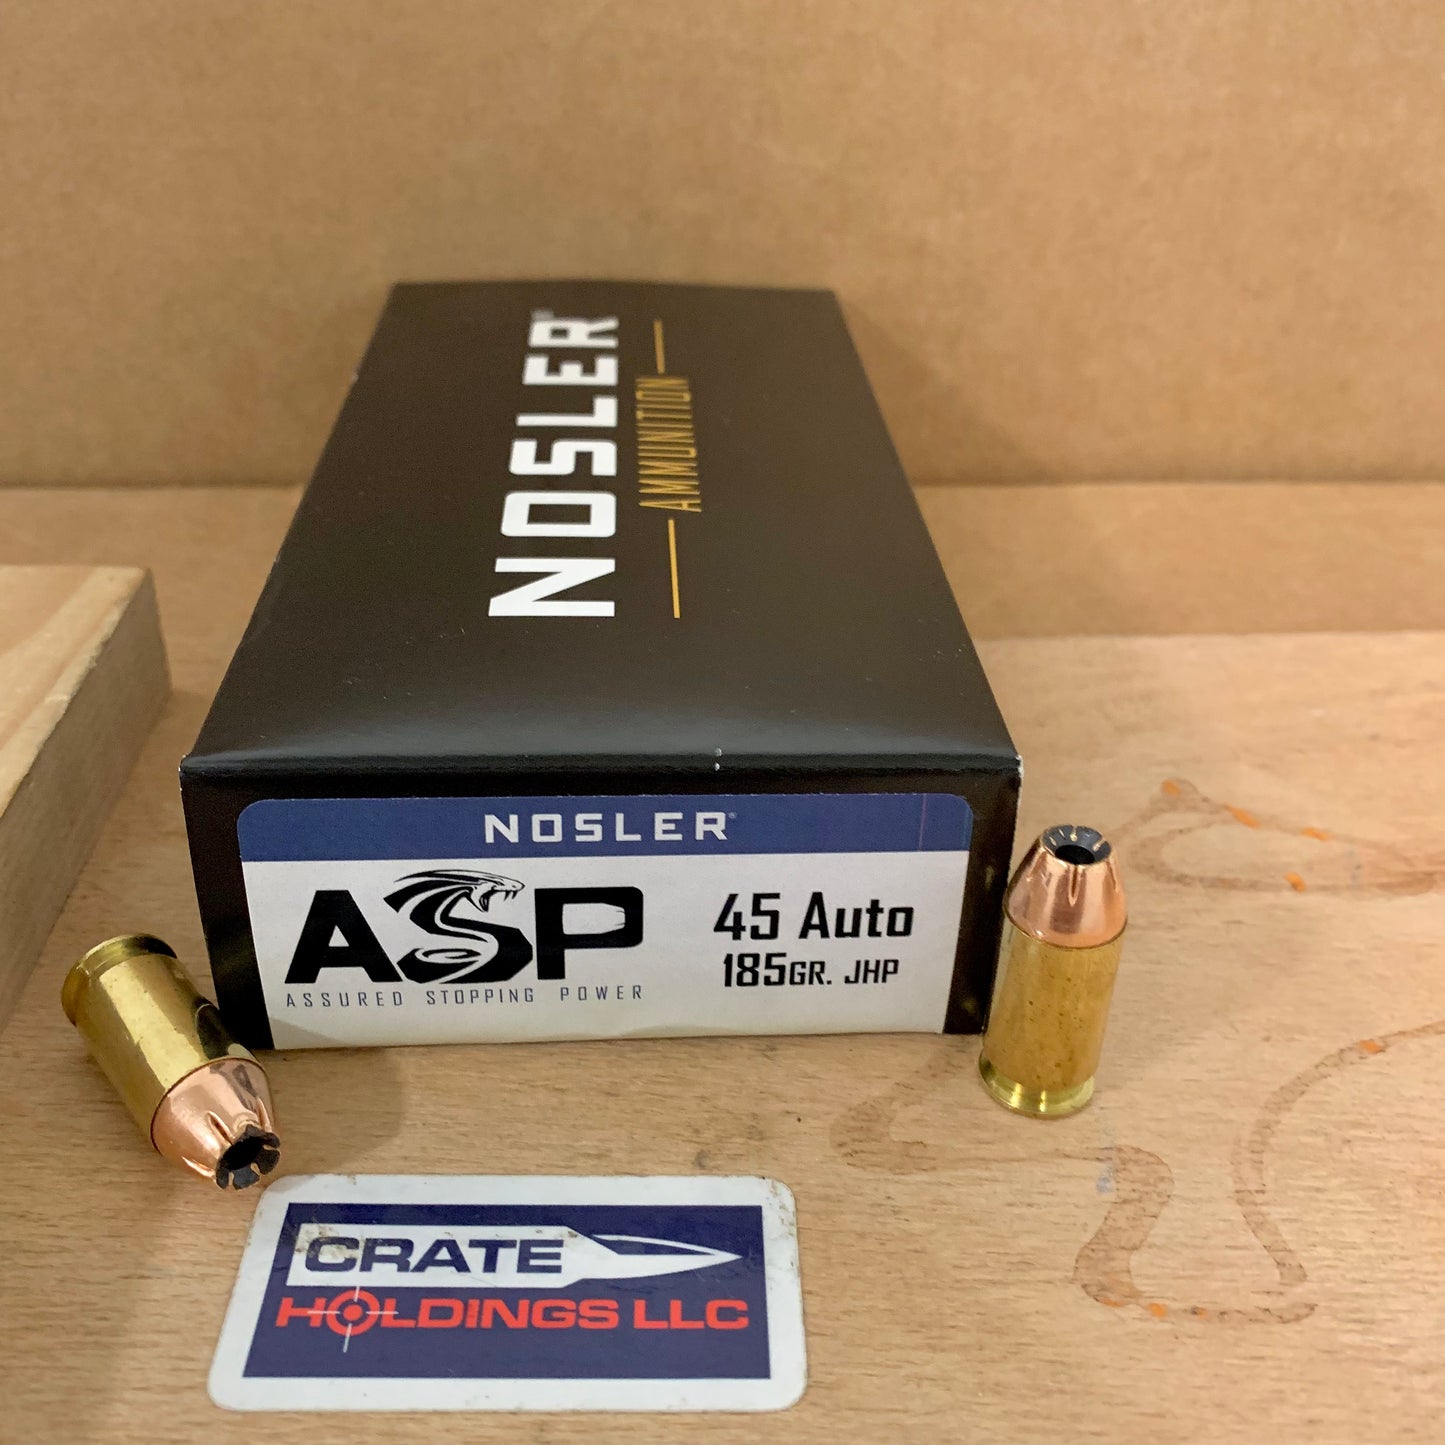 50 Count Box Nosler Assured Stopping Power .45 ACP / Auto Ammo 185gr JHP ASP - 51271